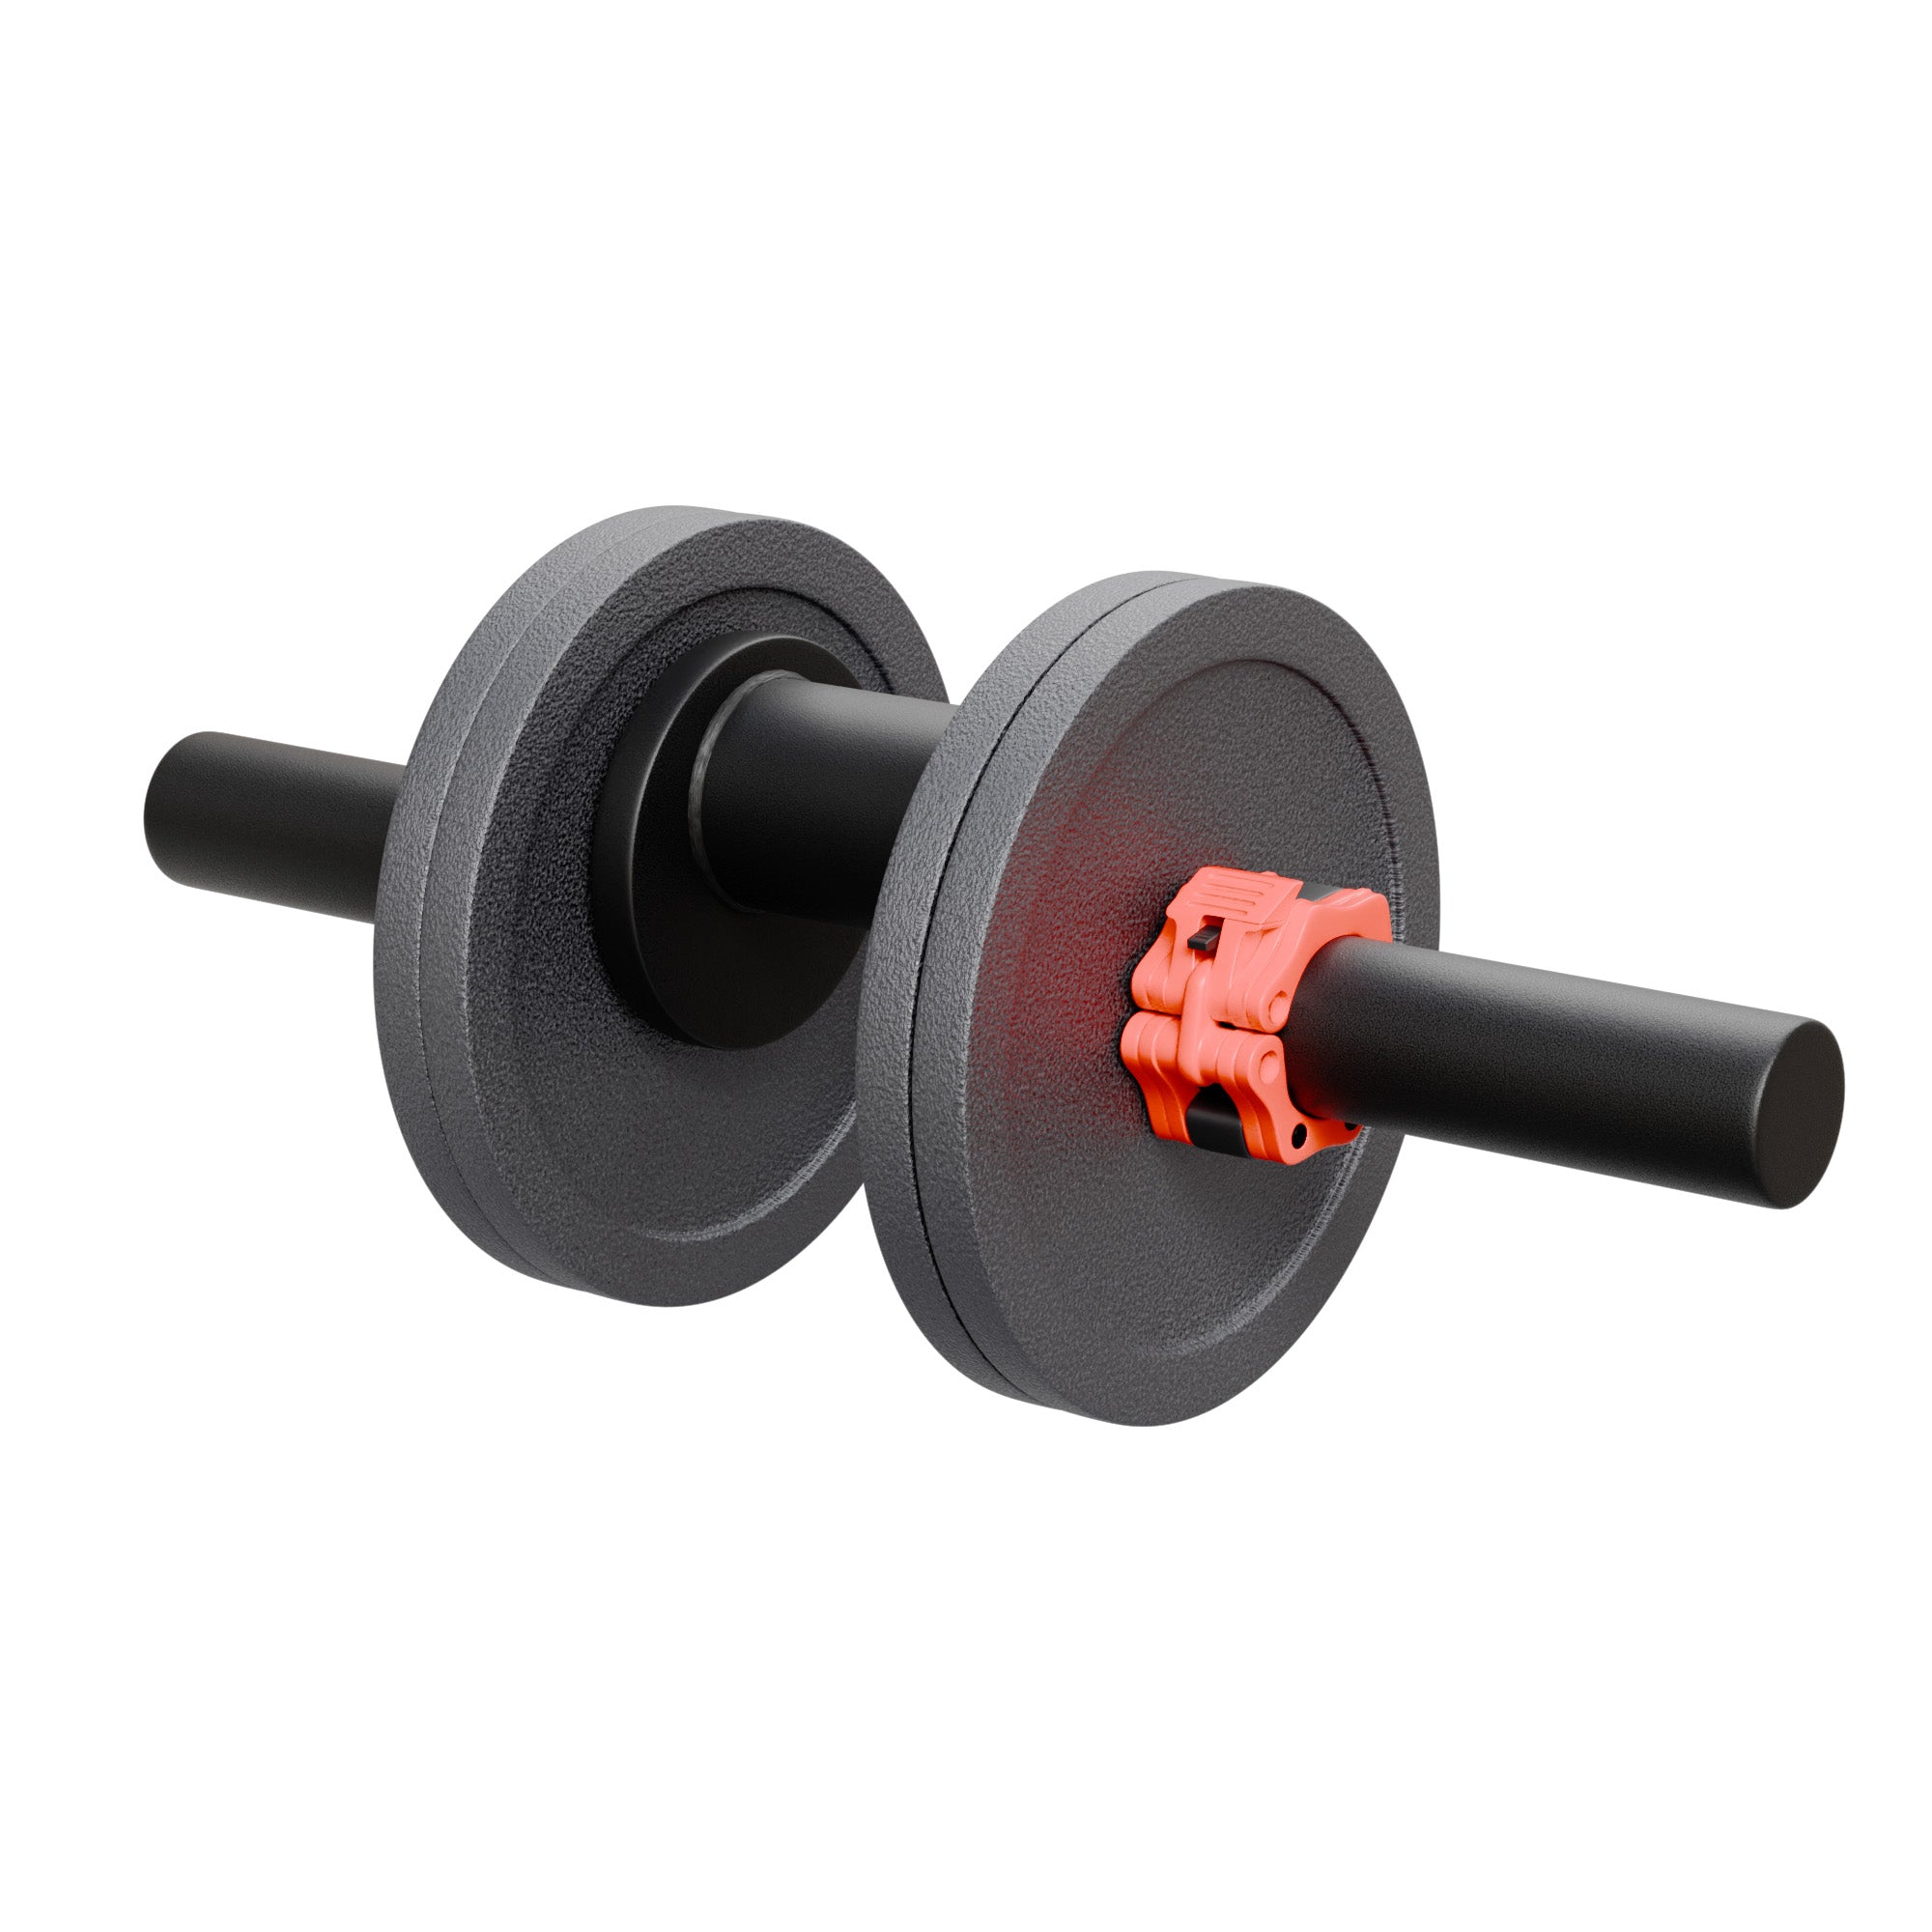 Thomas Inch Dumbbell Trainer